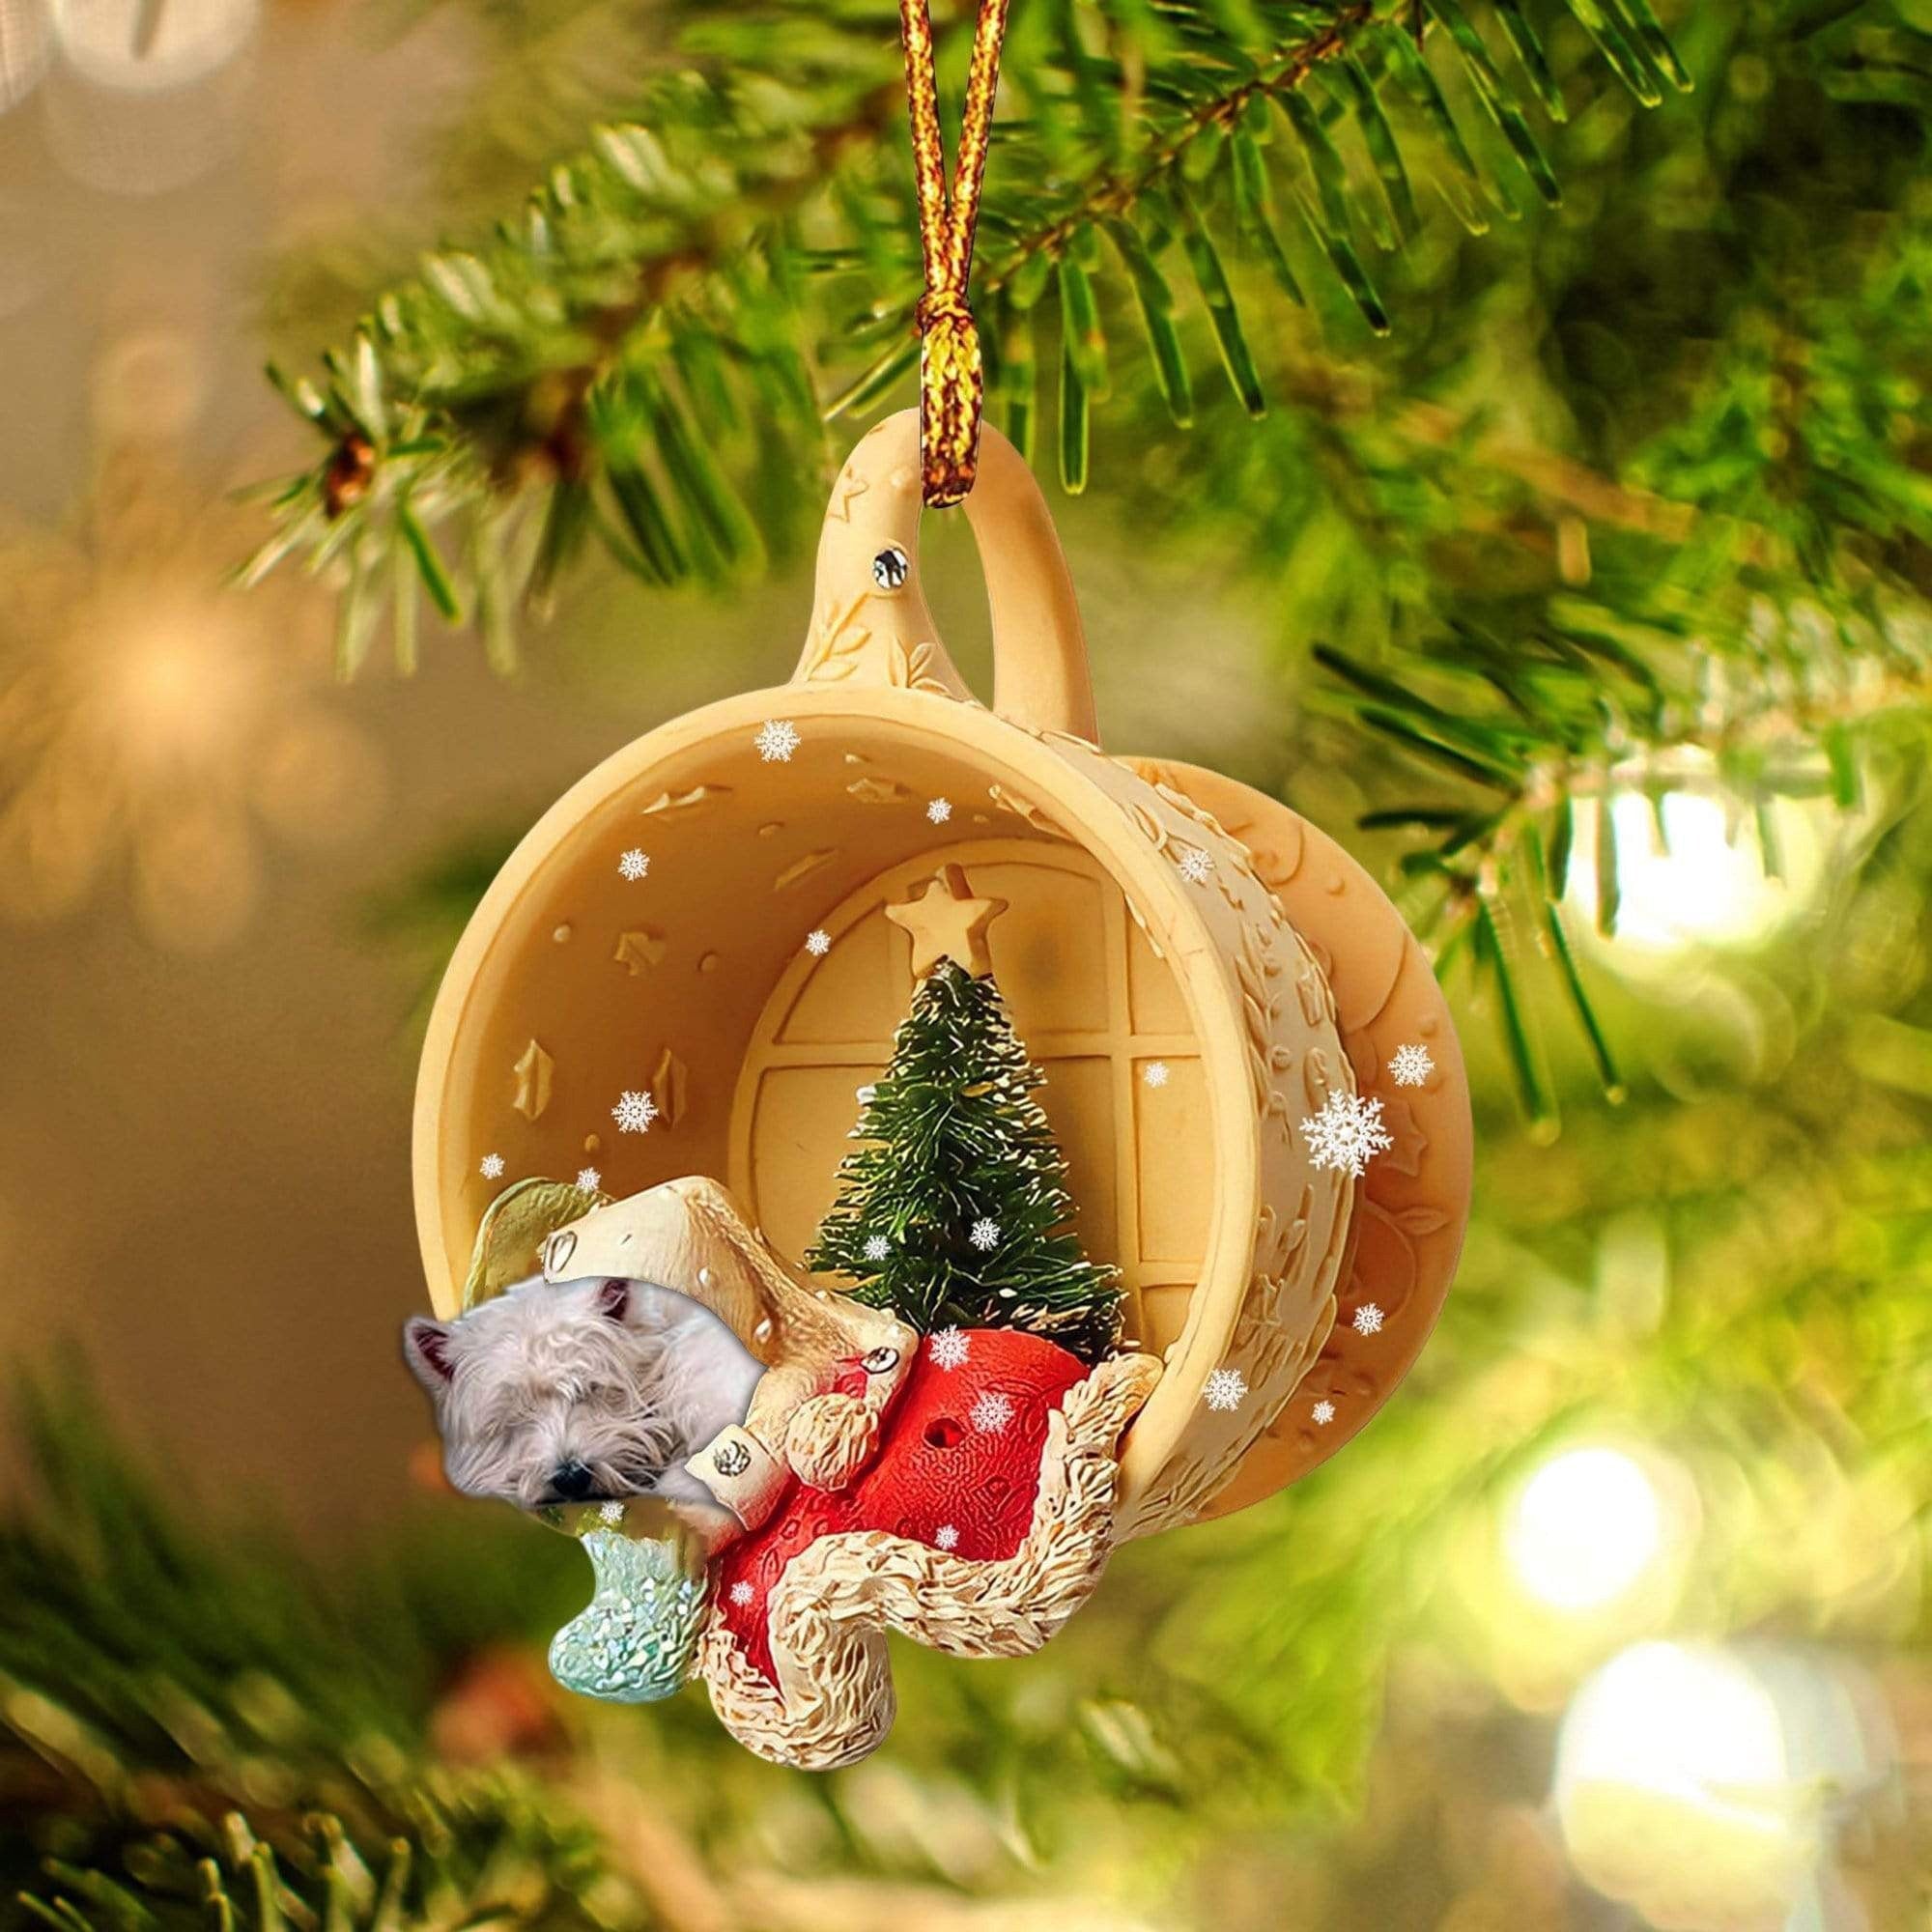 West Highland White Terrier Sleeping In A Cup Christmas Ornament/ Flat Acrylic Dog Christmas Ornament